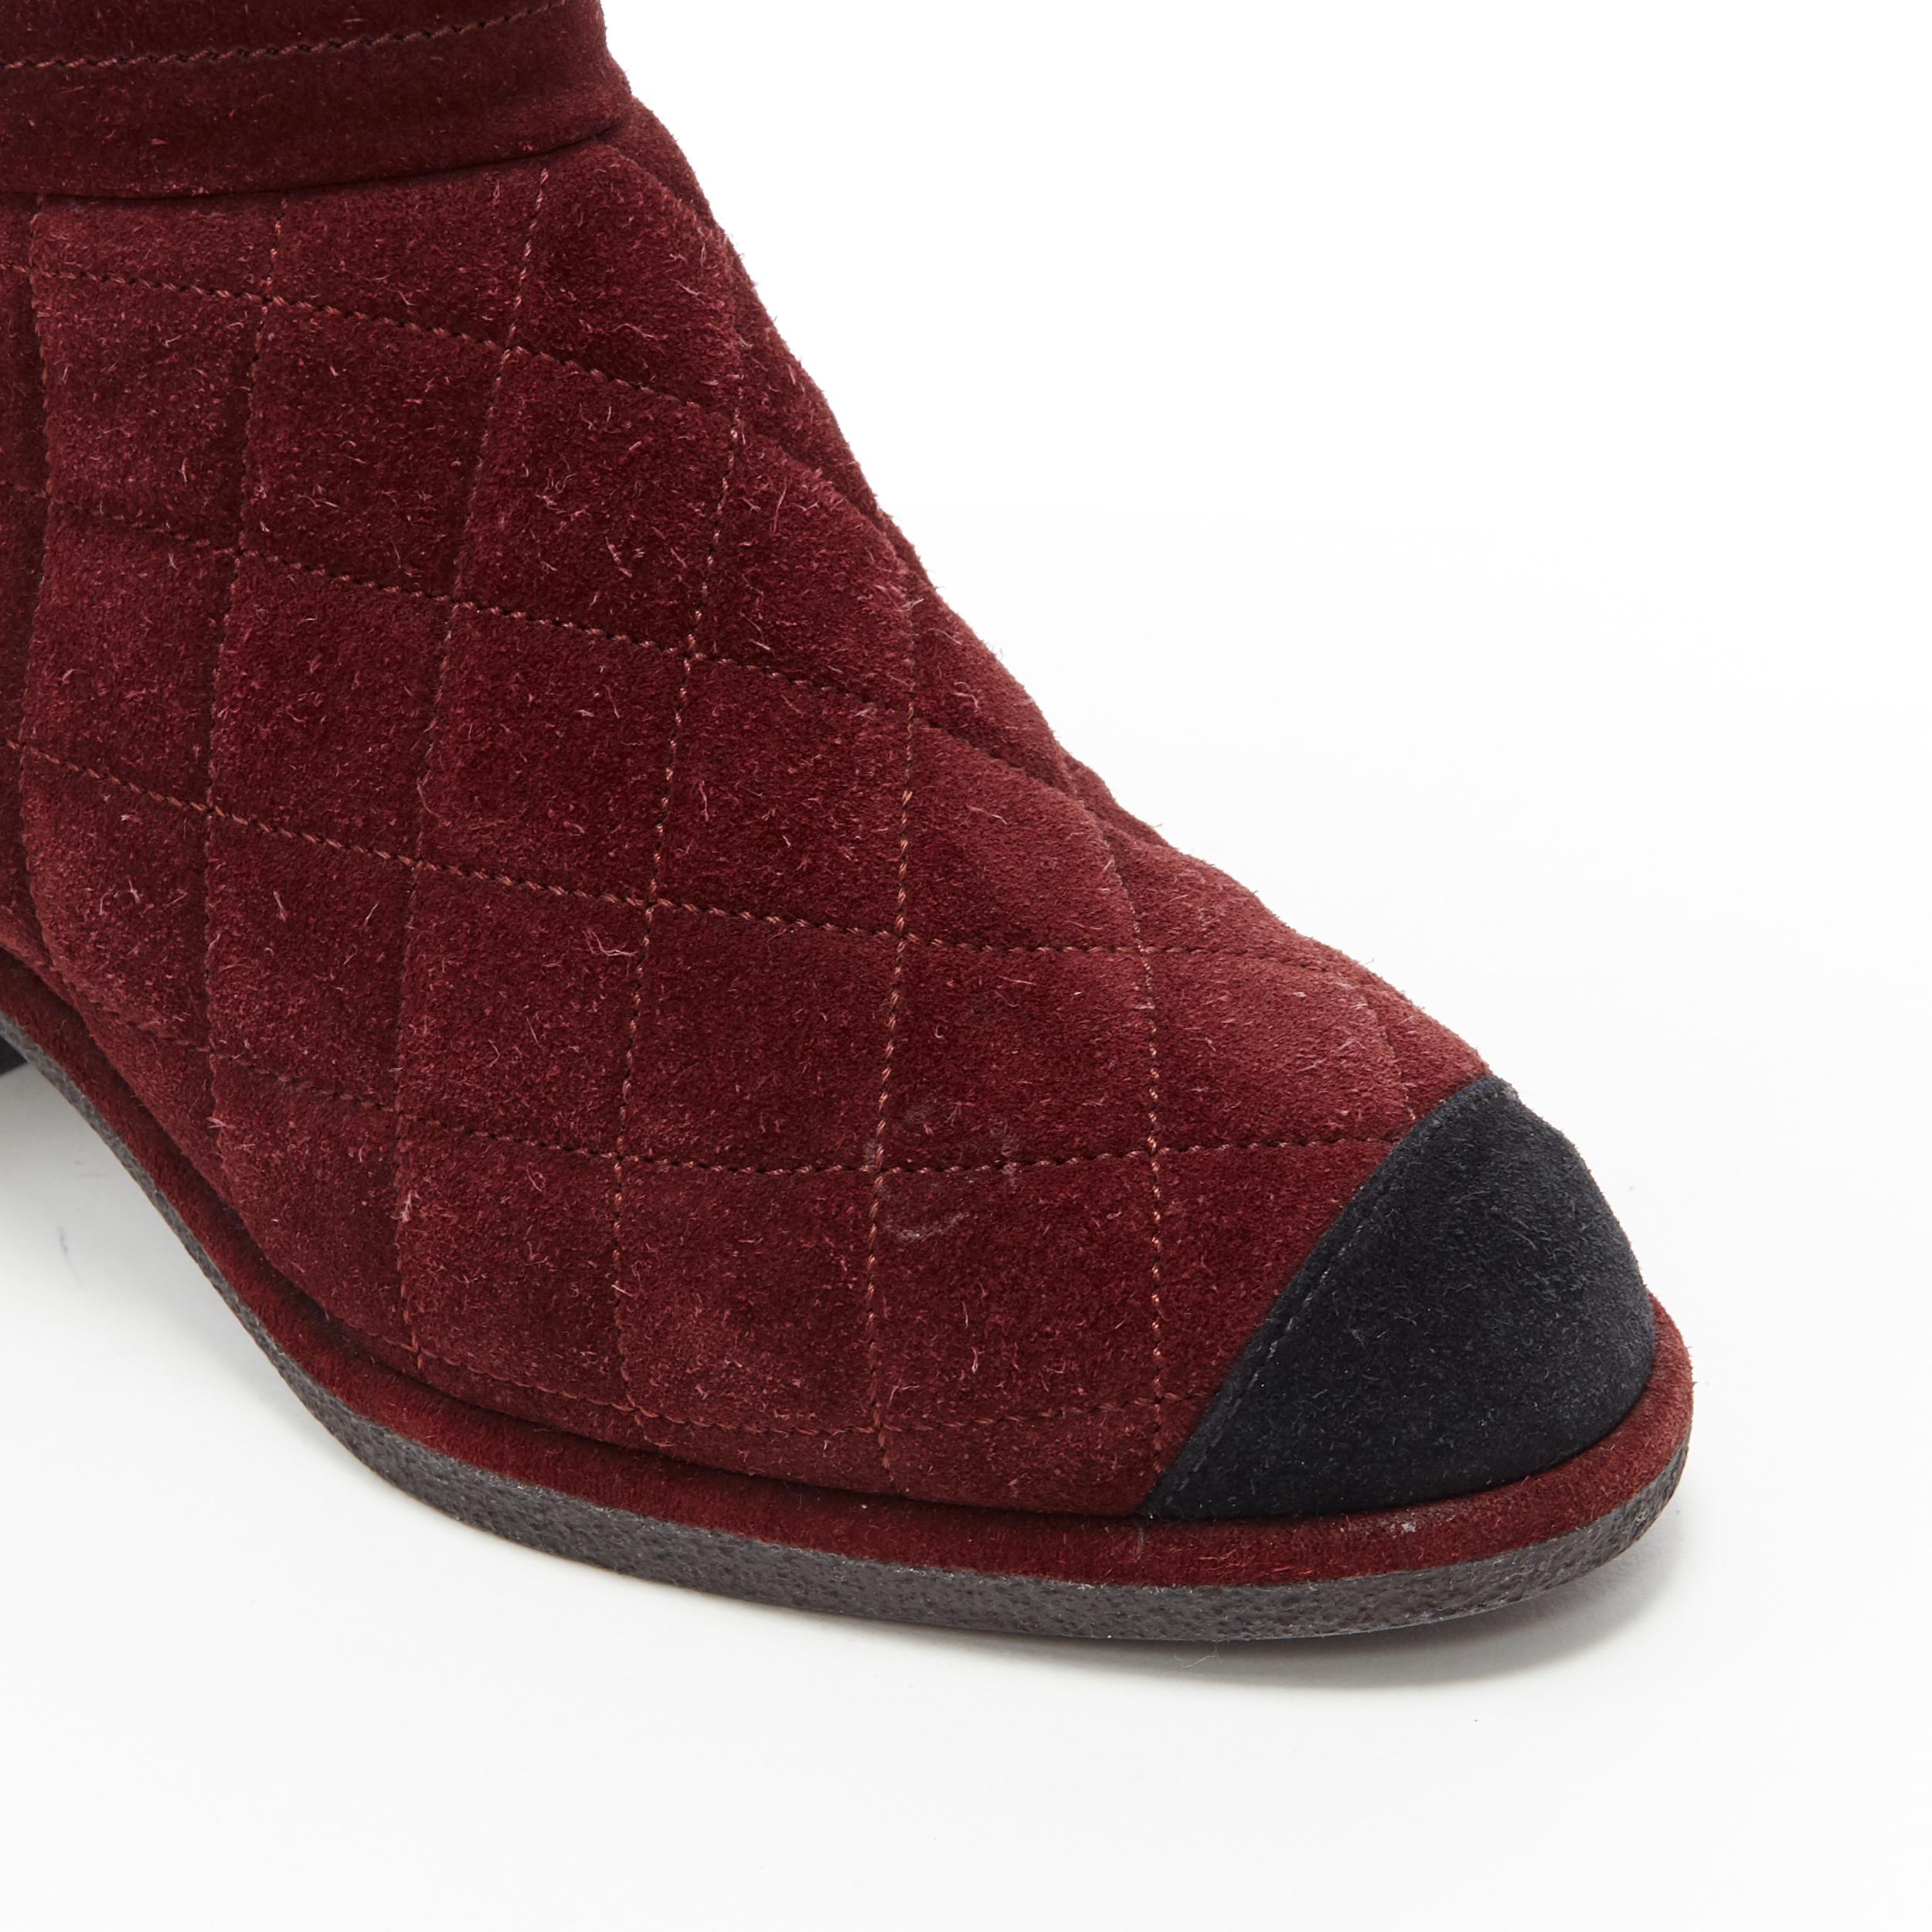 Women's CHANEL burgundy CC red diamond quilted suede toe cap shearling ankle boot EU37